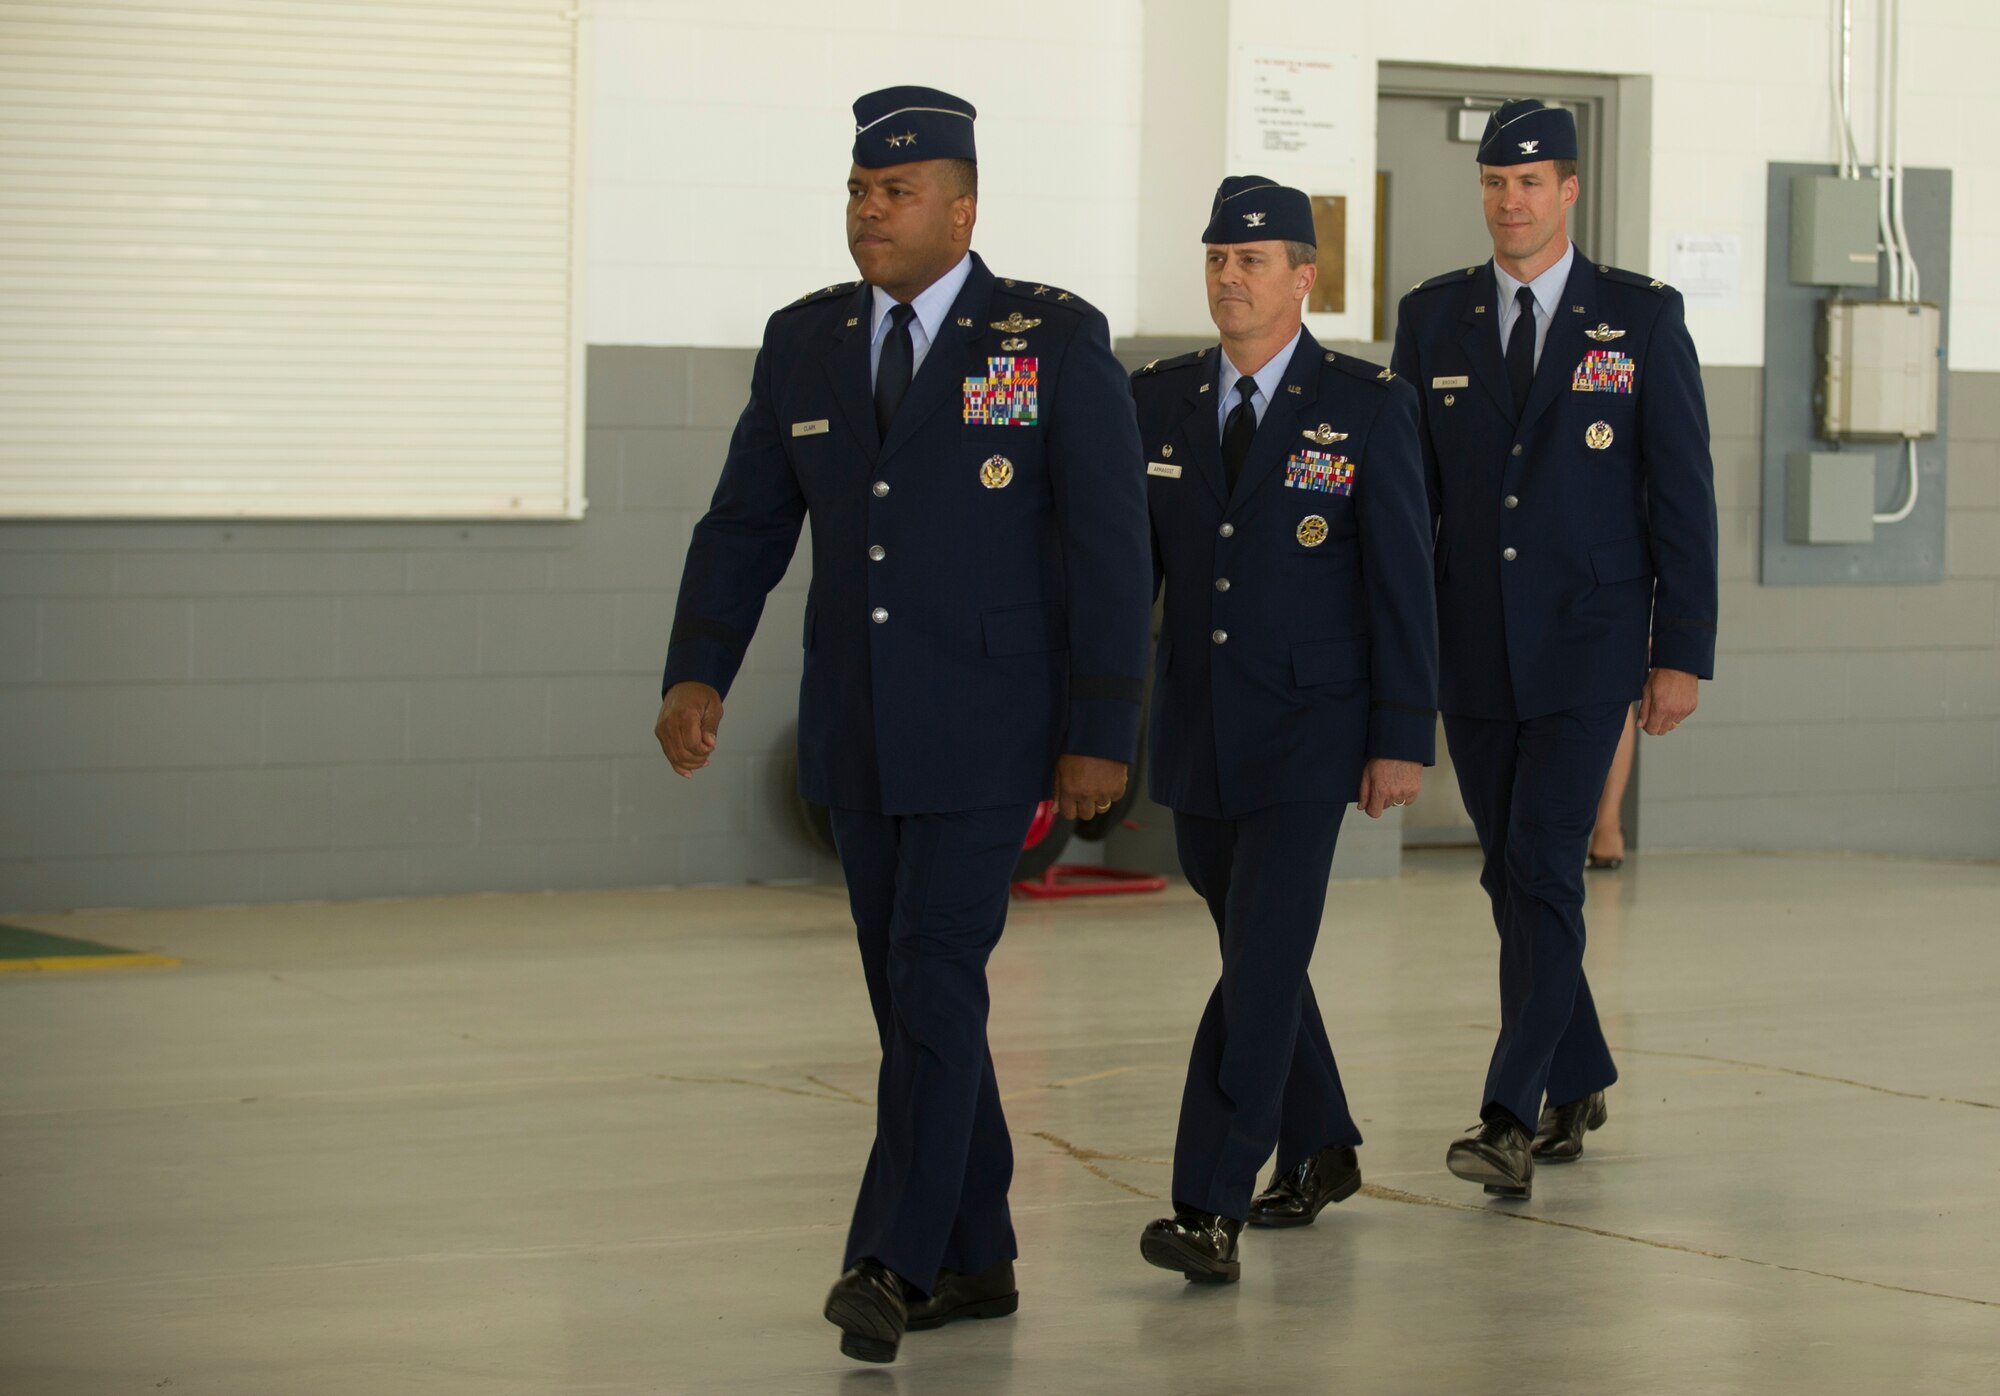 The official party arrives during the 5th Bomb Wing change of command ceremony at Minot Air Force Base, N.D., June 3, 2016. Col. Matthew Brooks accepted command from Col. Jason Armagost as the new 5th BW commander . (U.S. Air Force photo/Senior Airman Apryl Hall)